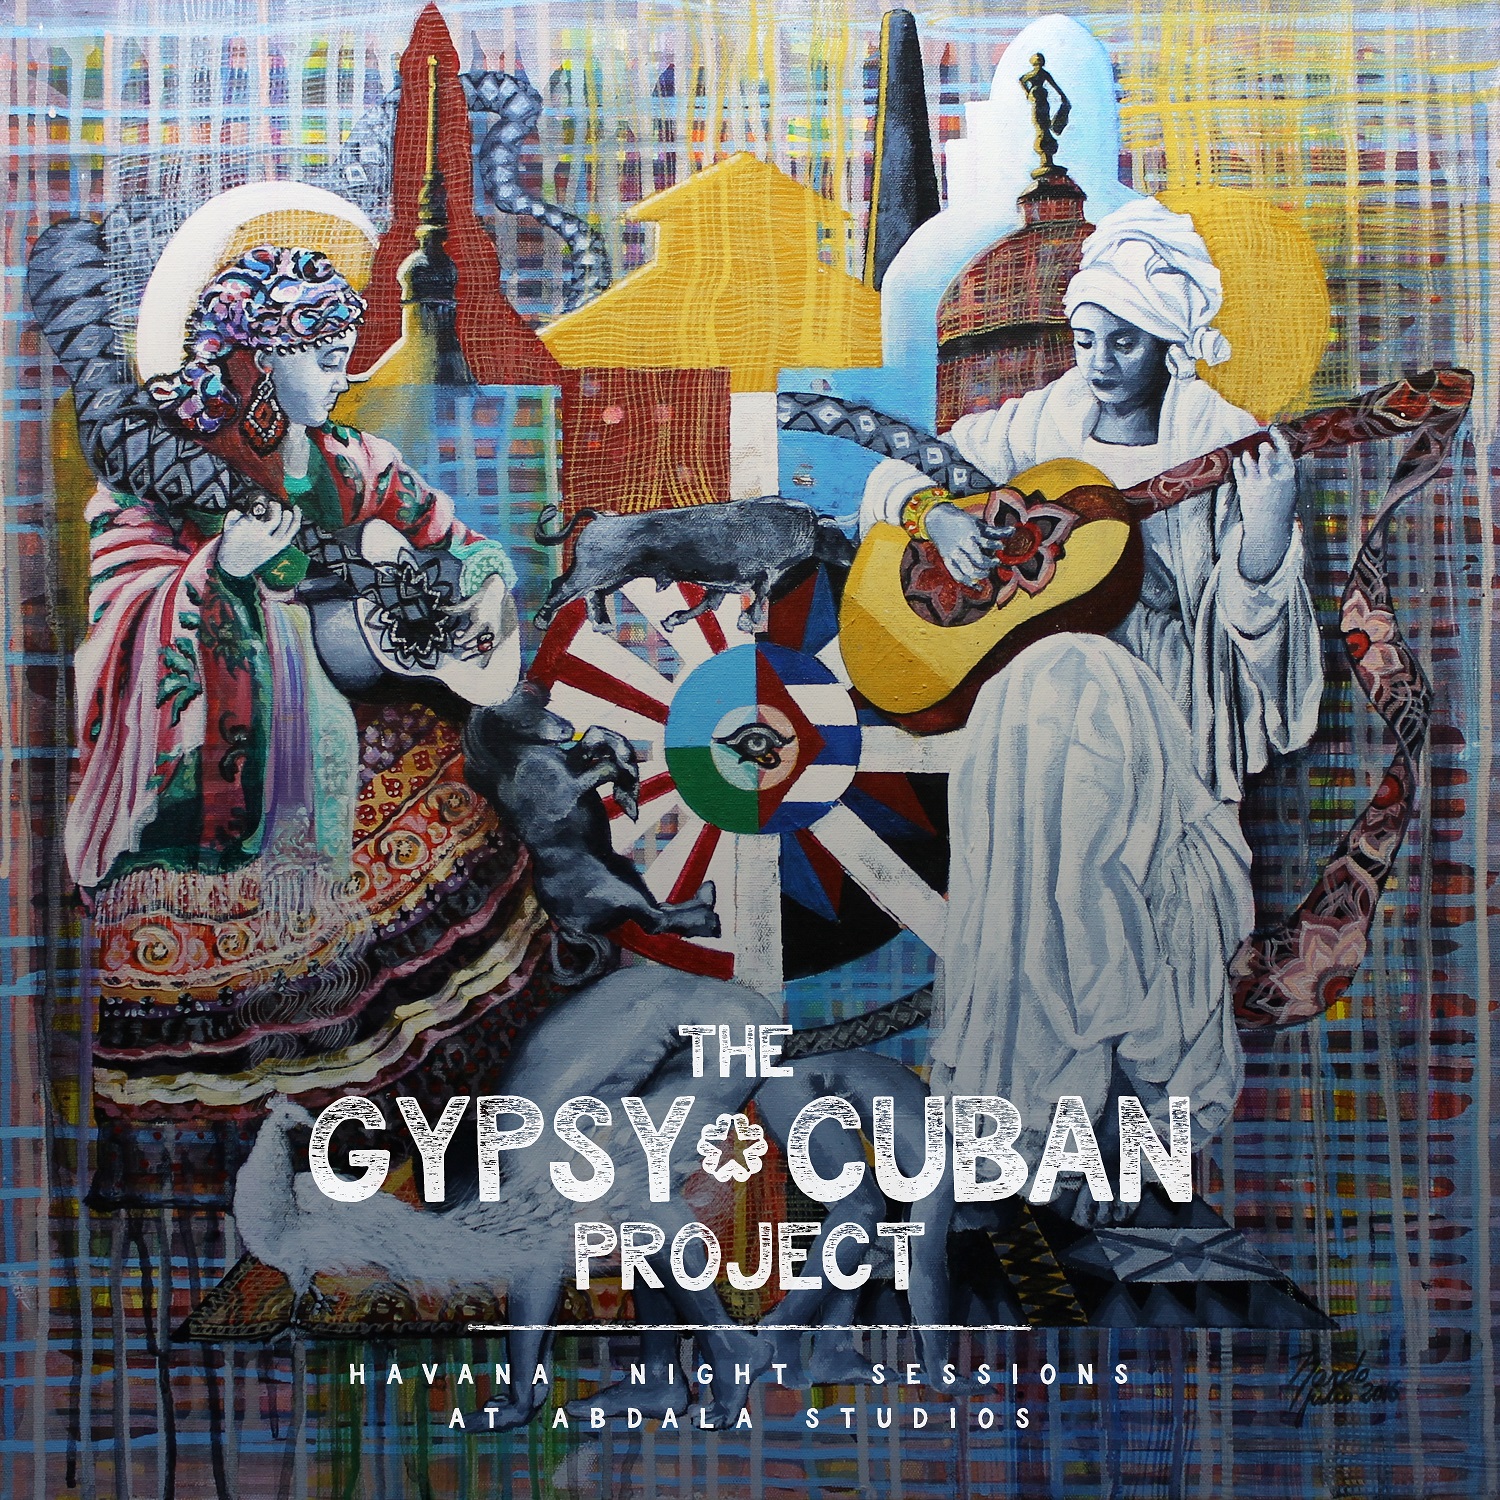 Havana Night Sessions | The Gypsy Cuban Project by Damian Draghici